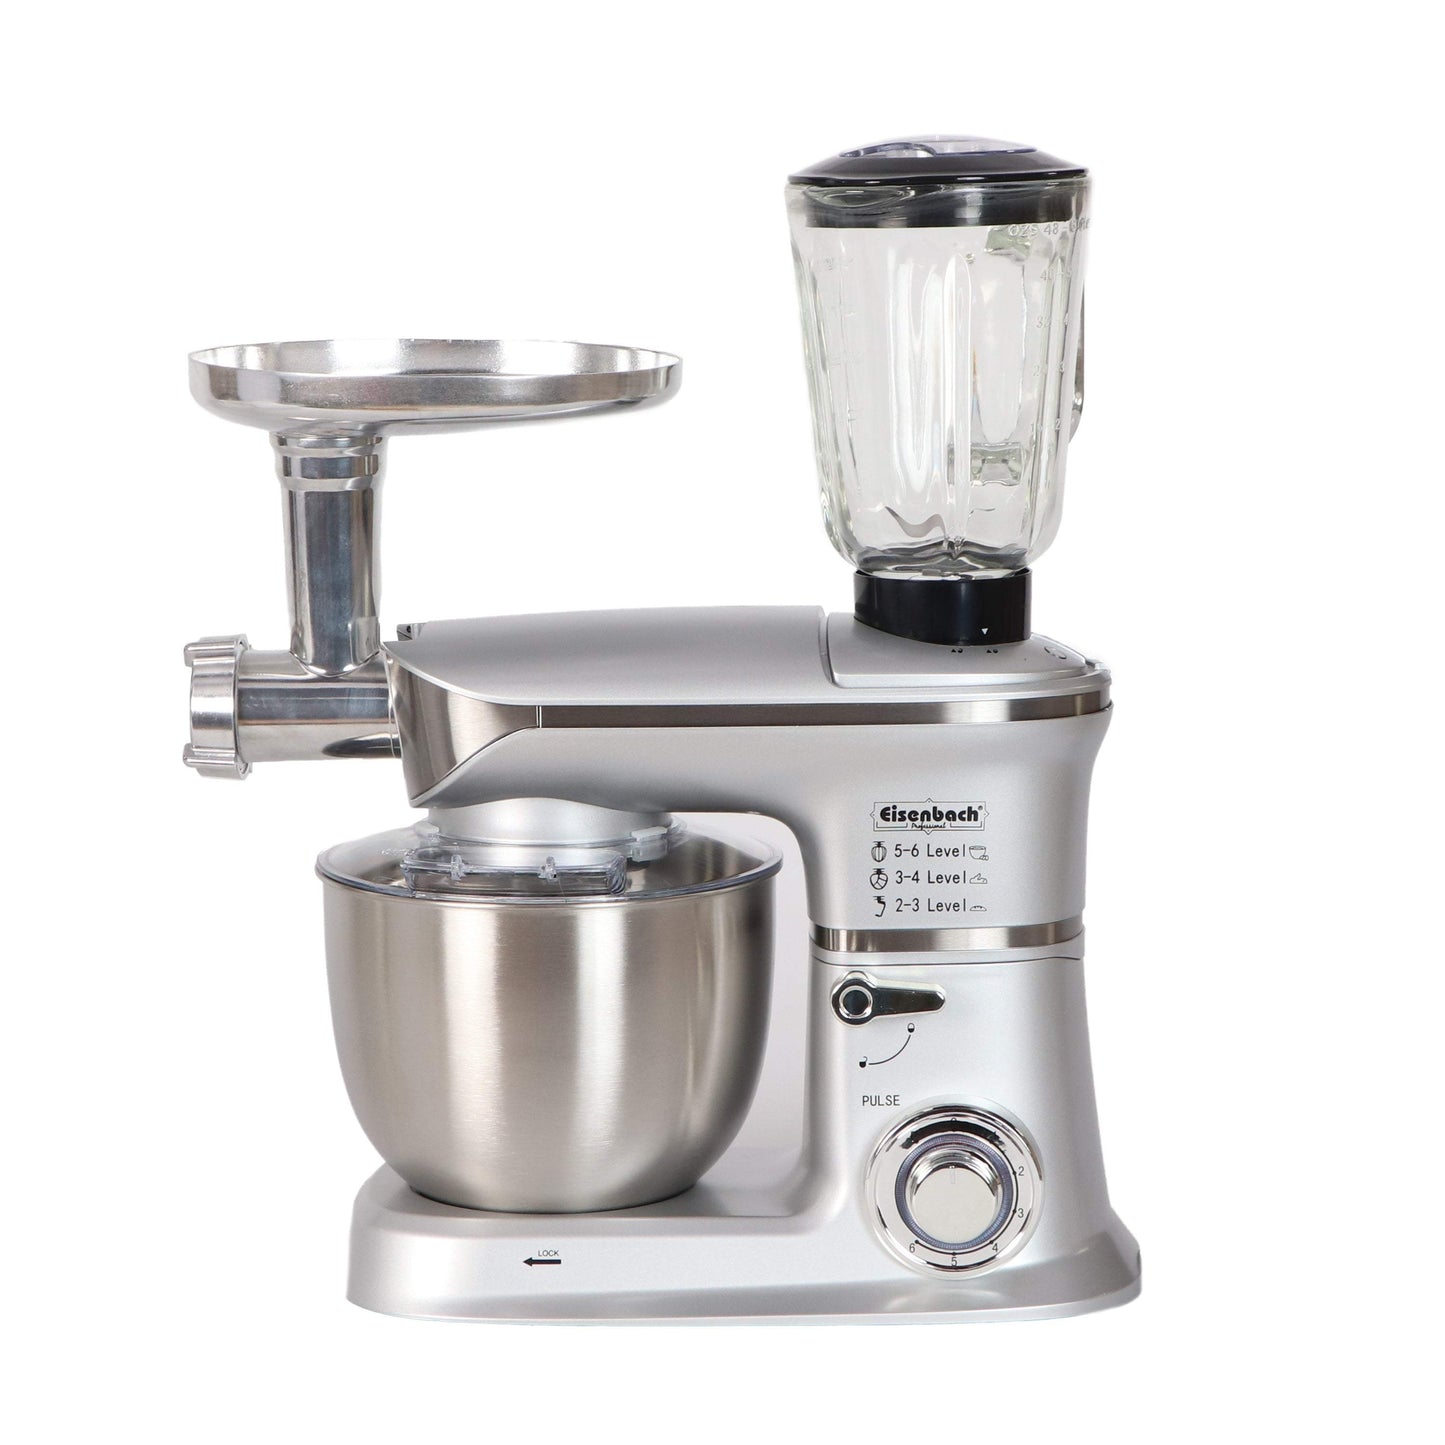 Eisenbach 3-in-1 Stand Mixer SC-263-C 2000W 6.5 L-Royal Brands Co-